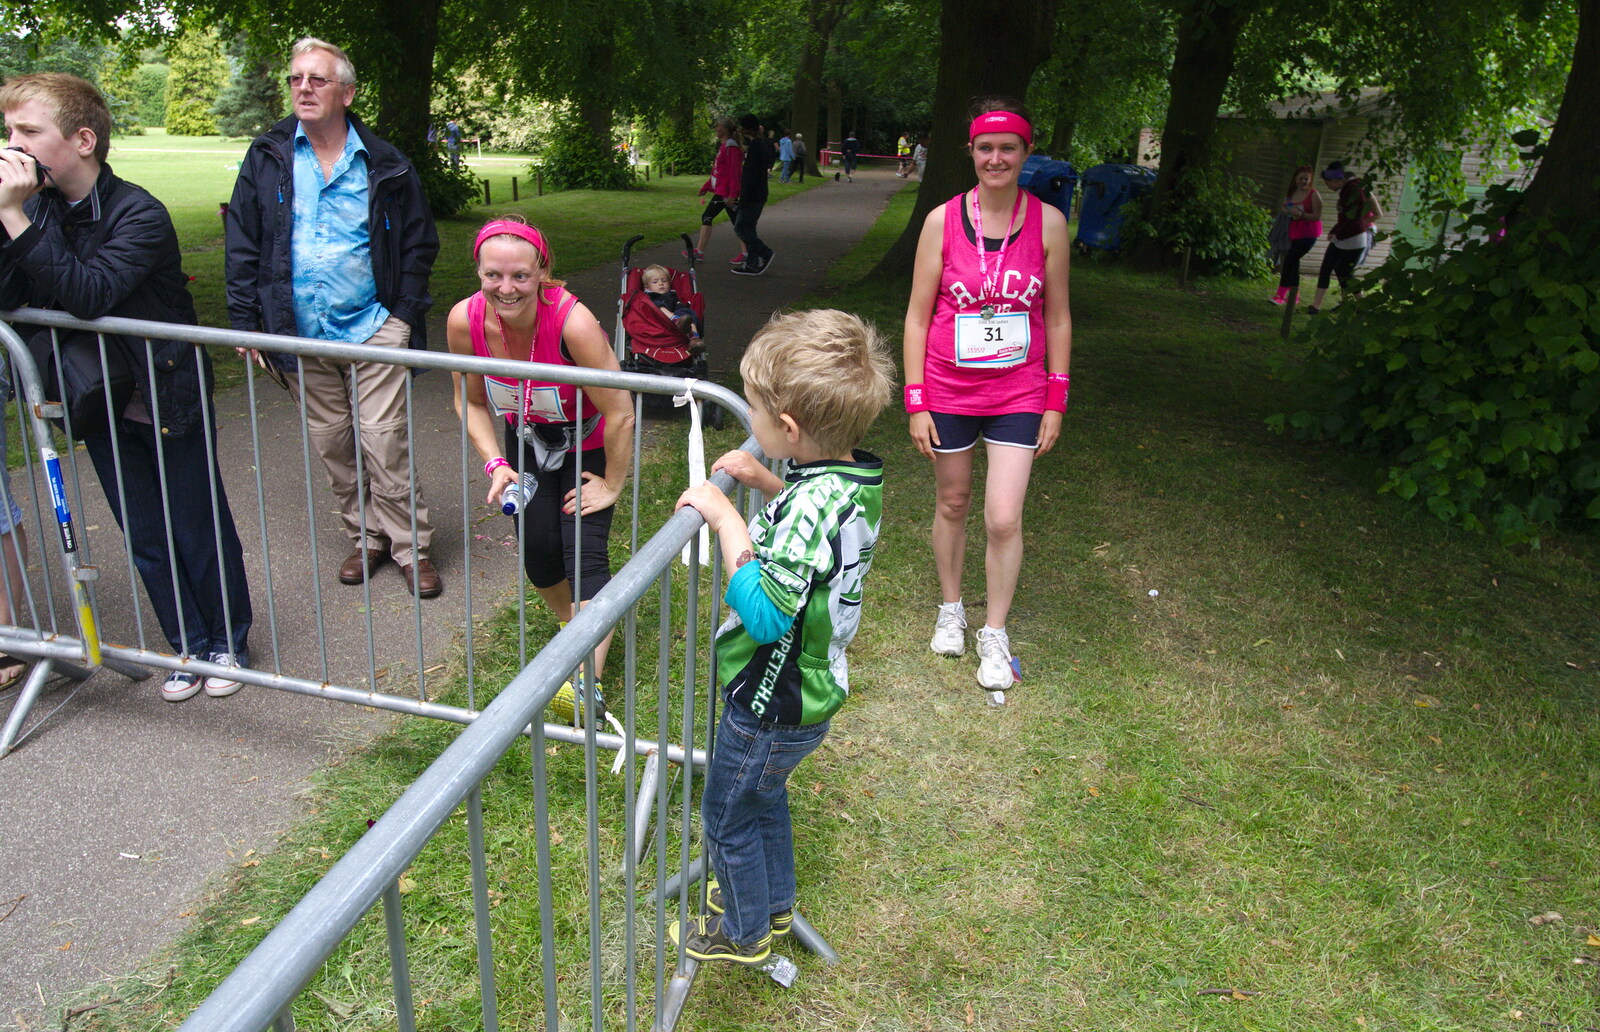 Fred climbs on a railing from Isobel's Race For Life, Chantry Park, Ipswich - 11th June 2014